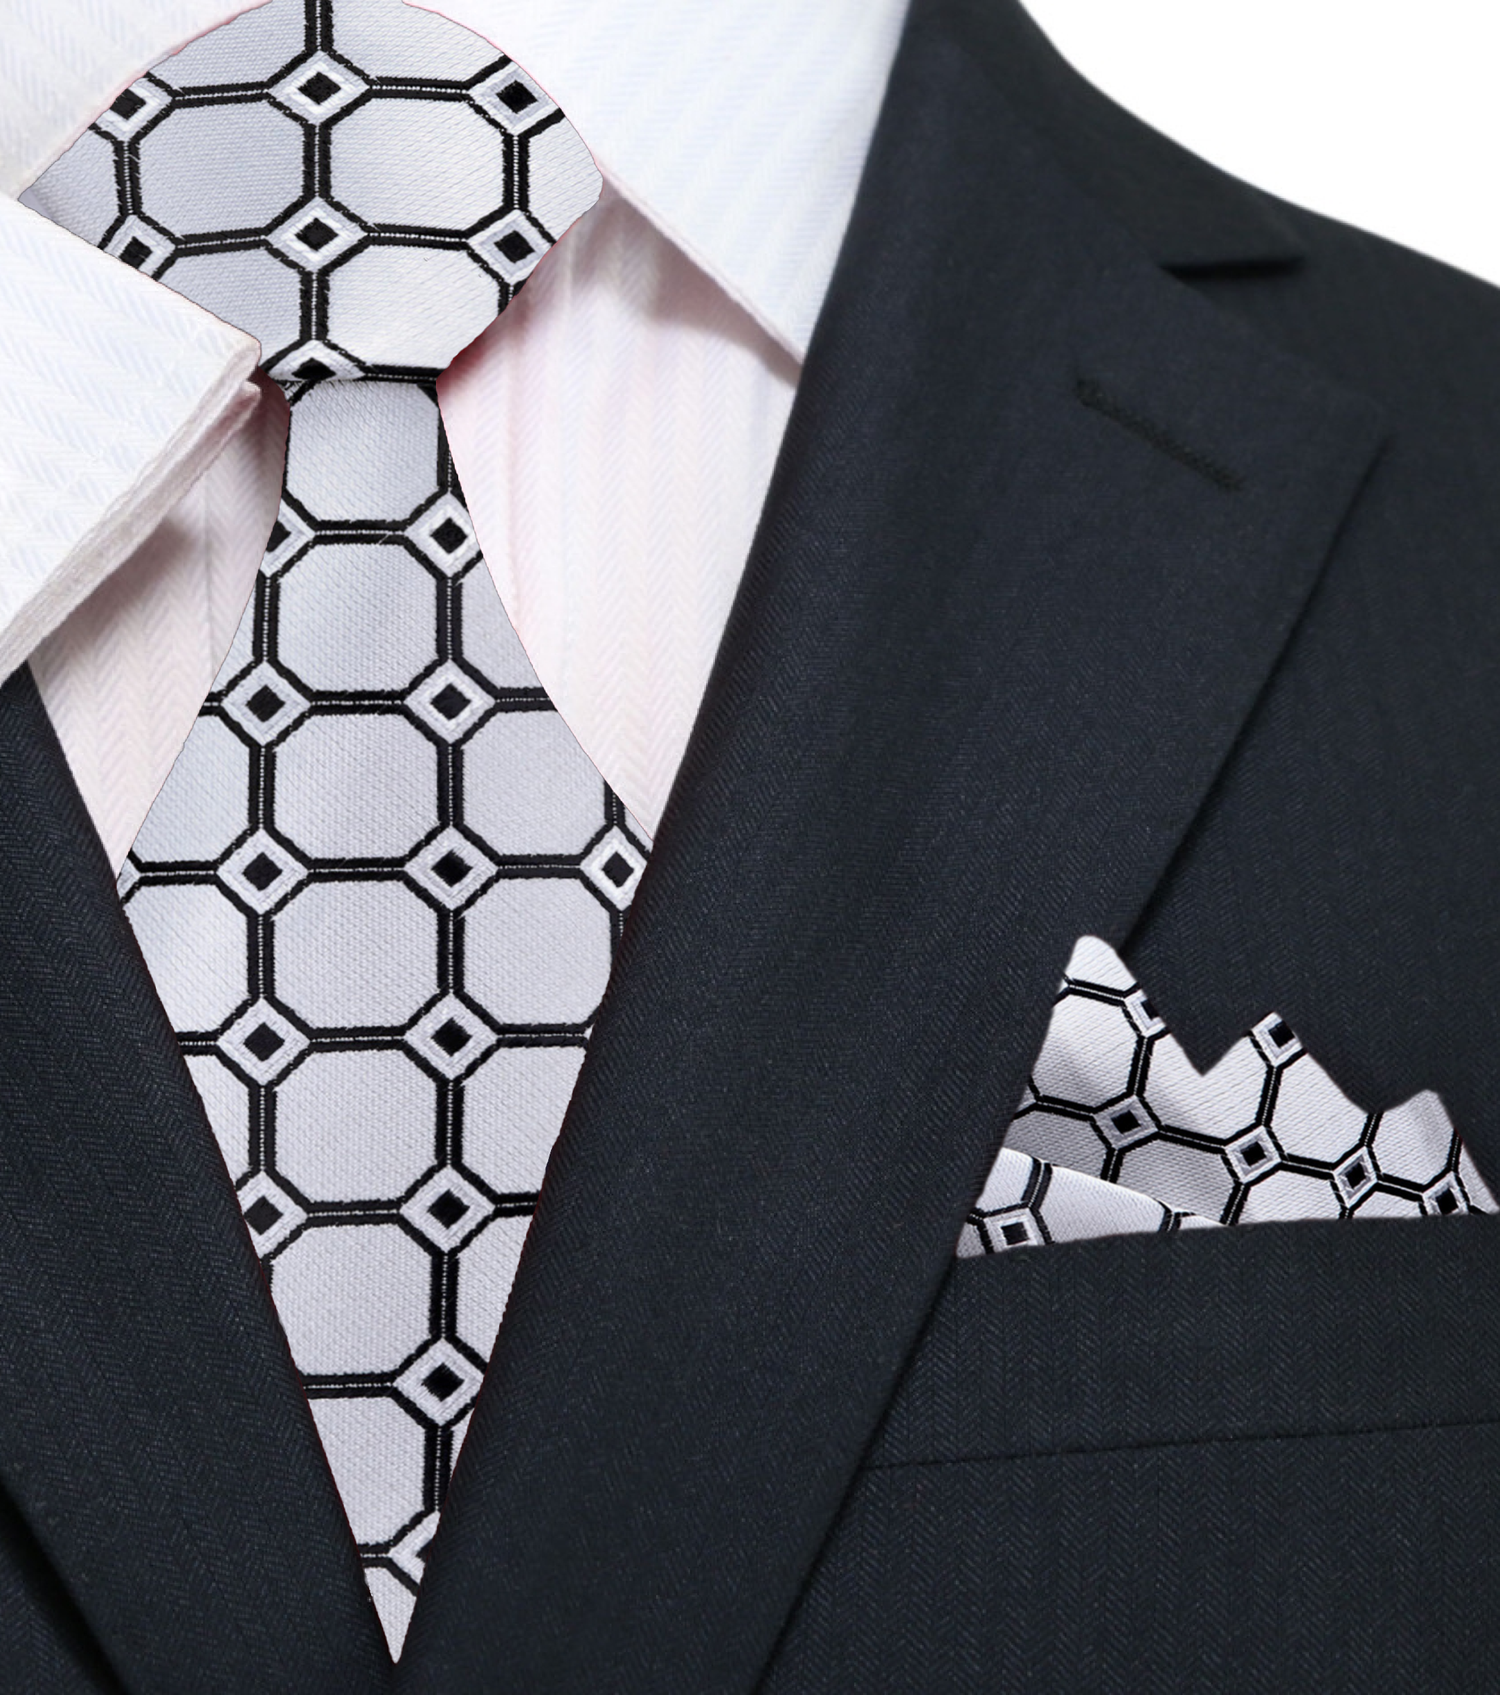 An Icy Silver, White, Black Geometric Squares With Small Diamonds Pattern Silk Necktie, Matching Pocket Square